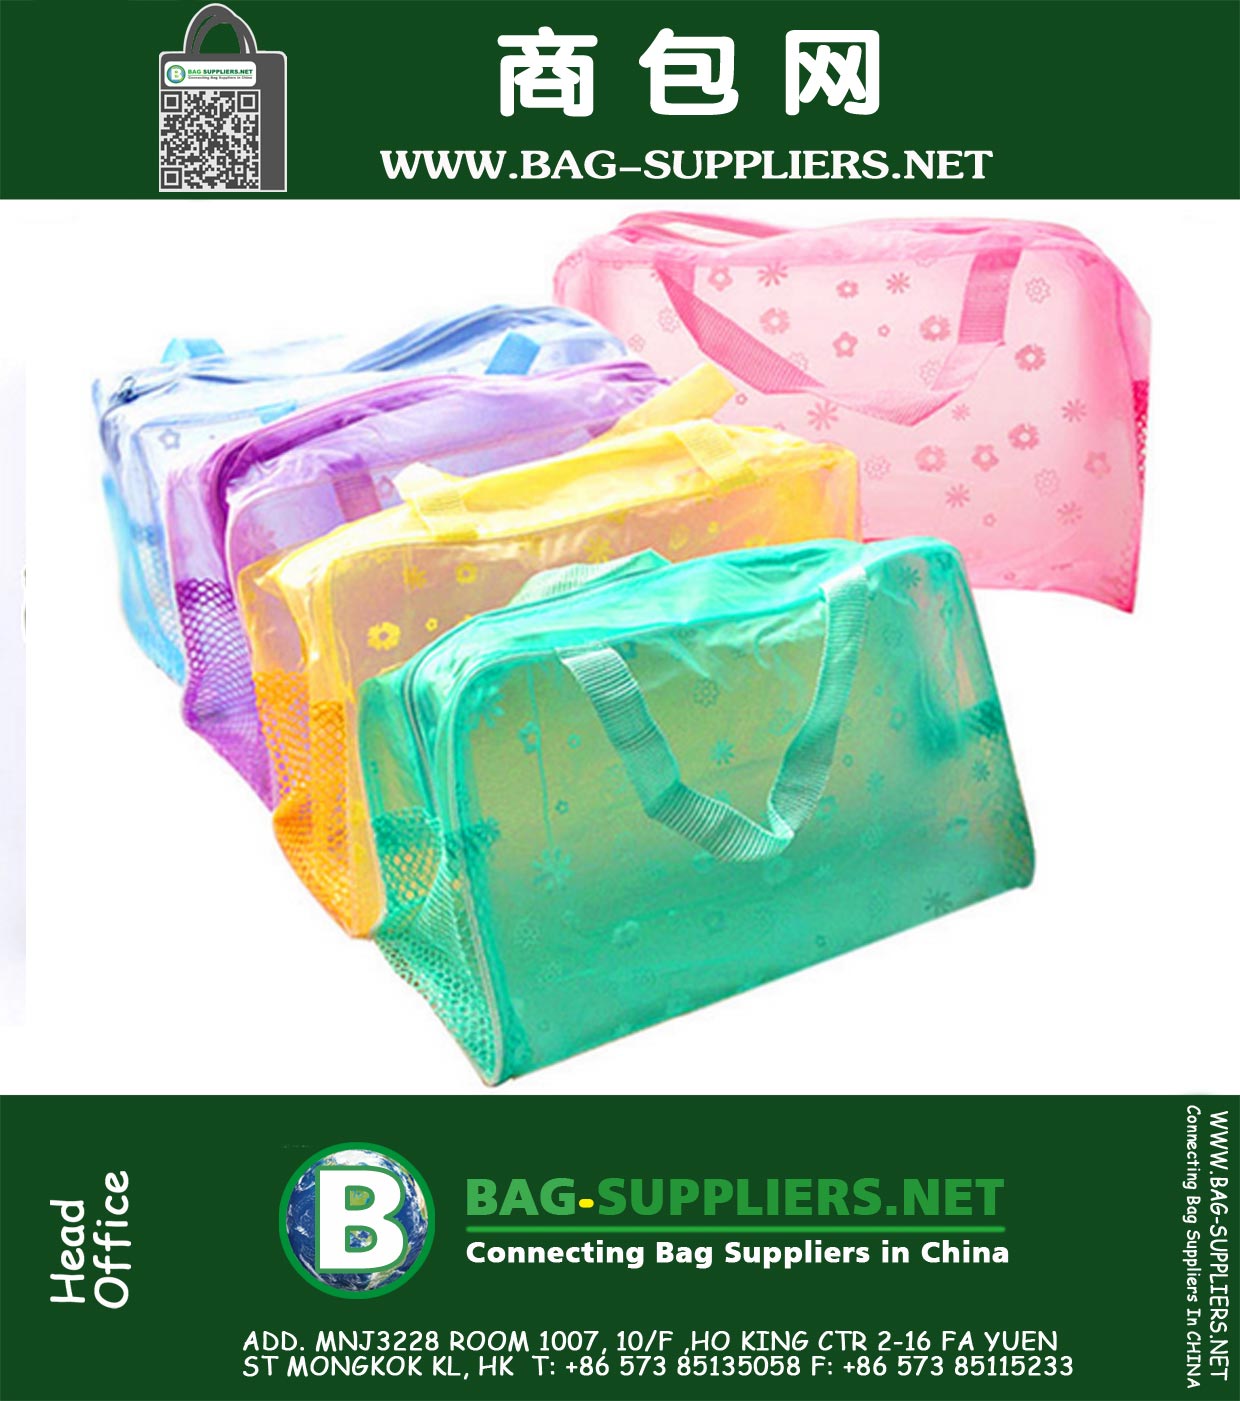 Waterproof PVC Clear Storage Box Make-up bag for Cosmetics and Bathroom Products Housekeeping Organization Storage Bag